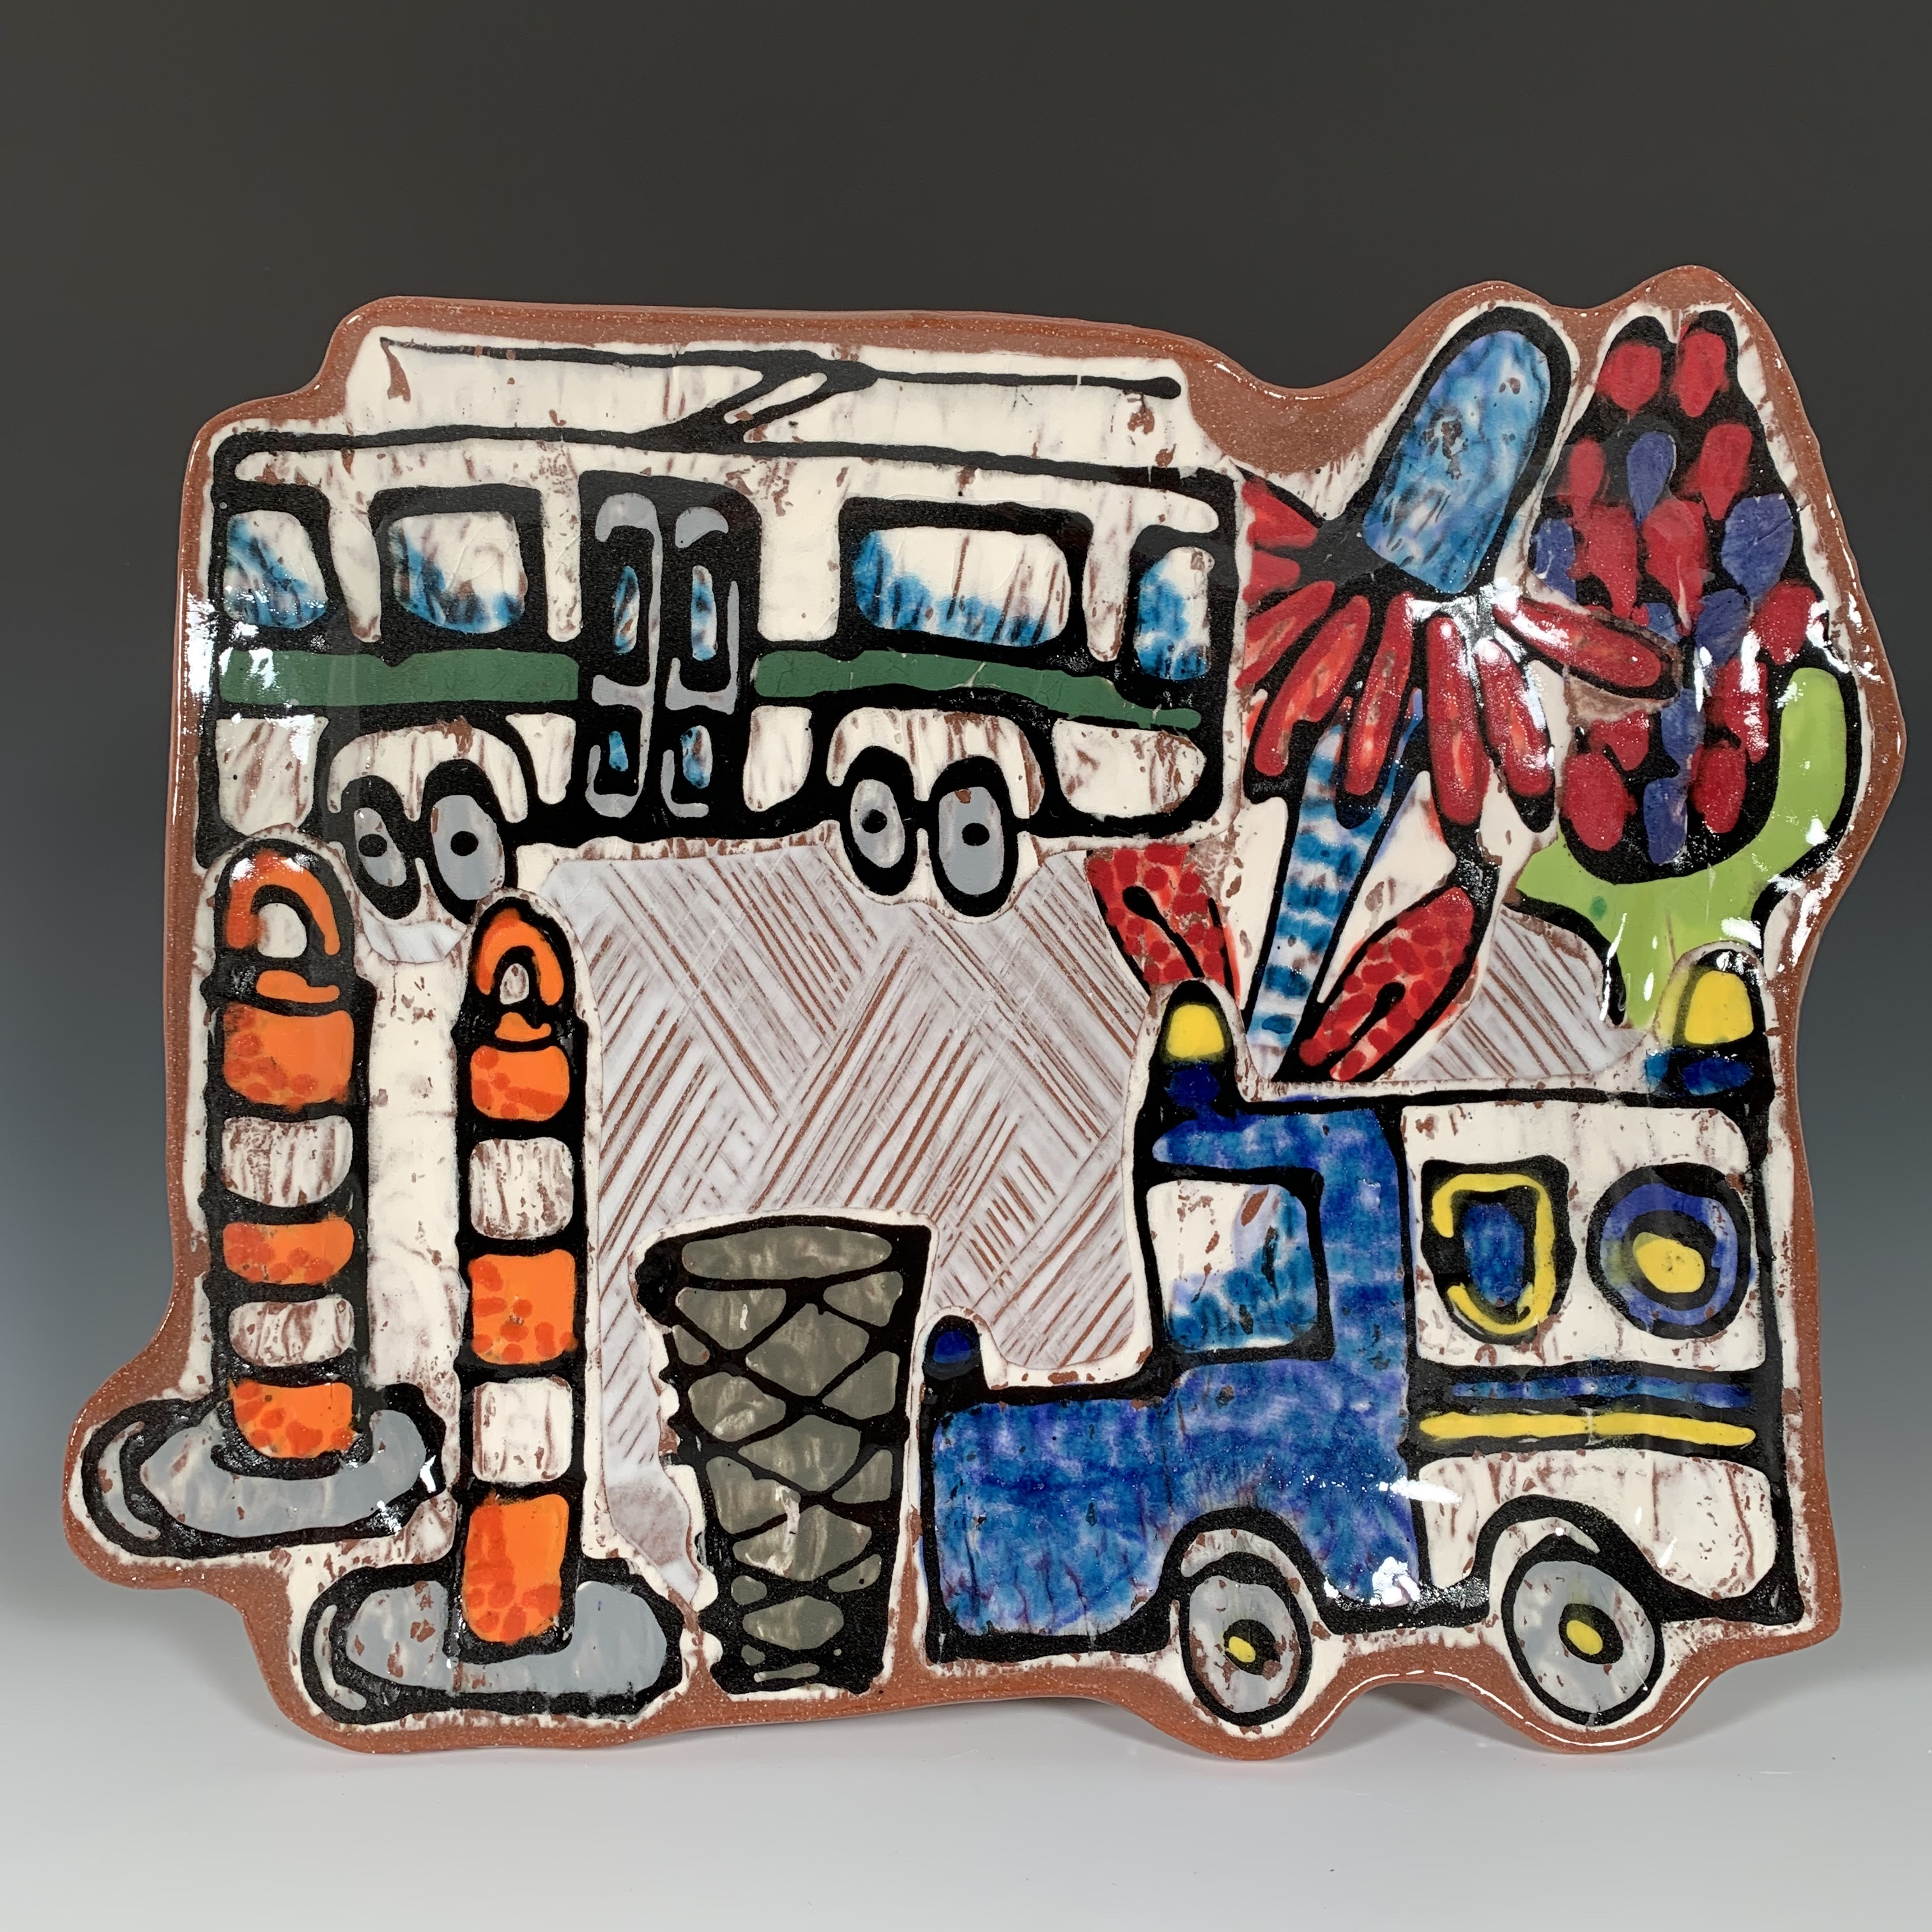 Platter with a truck, bus, flowers, and traffic cones